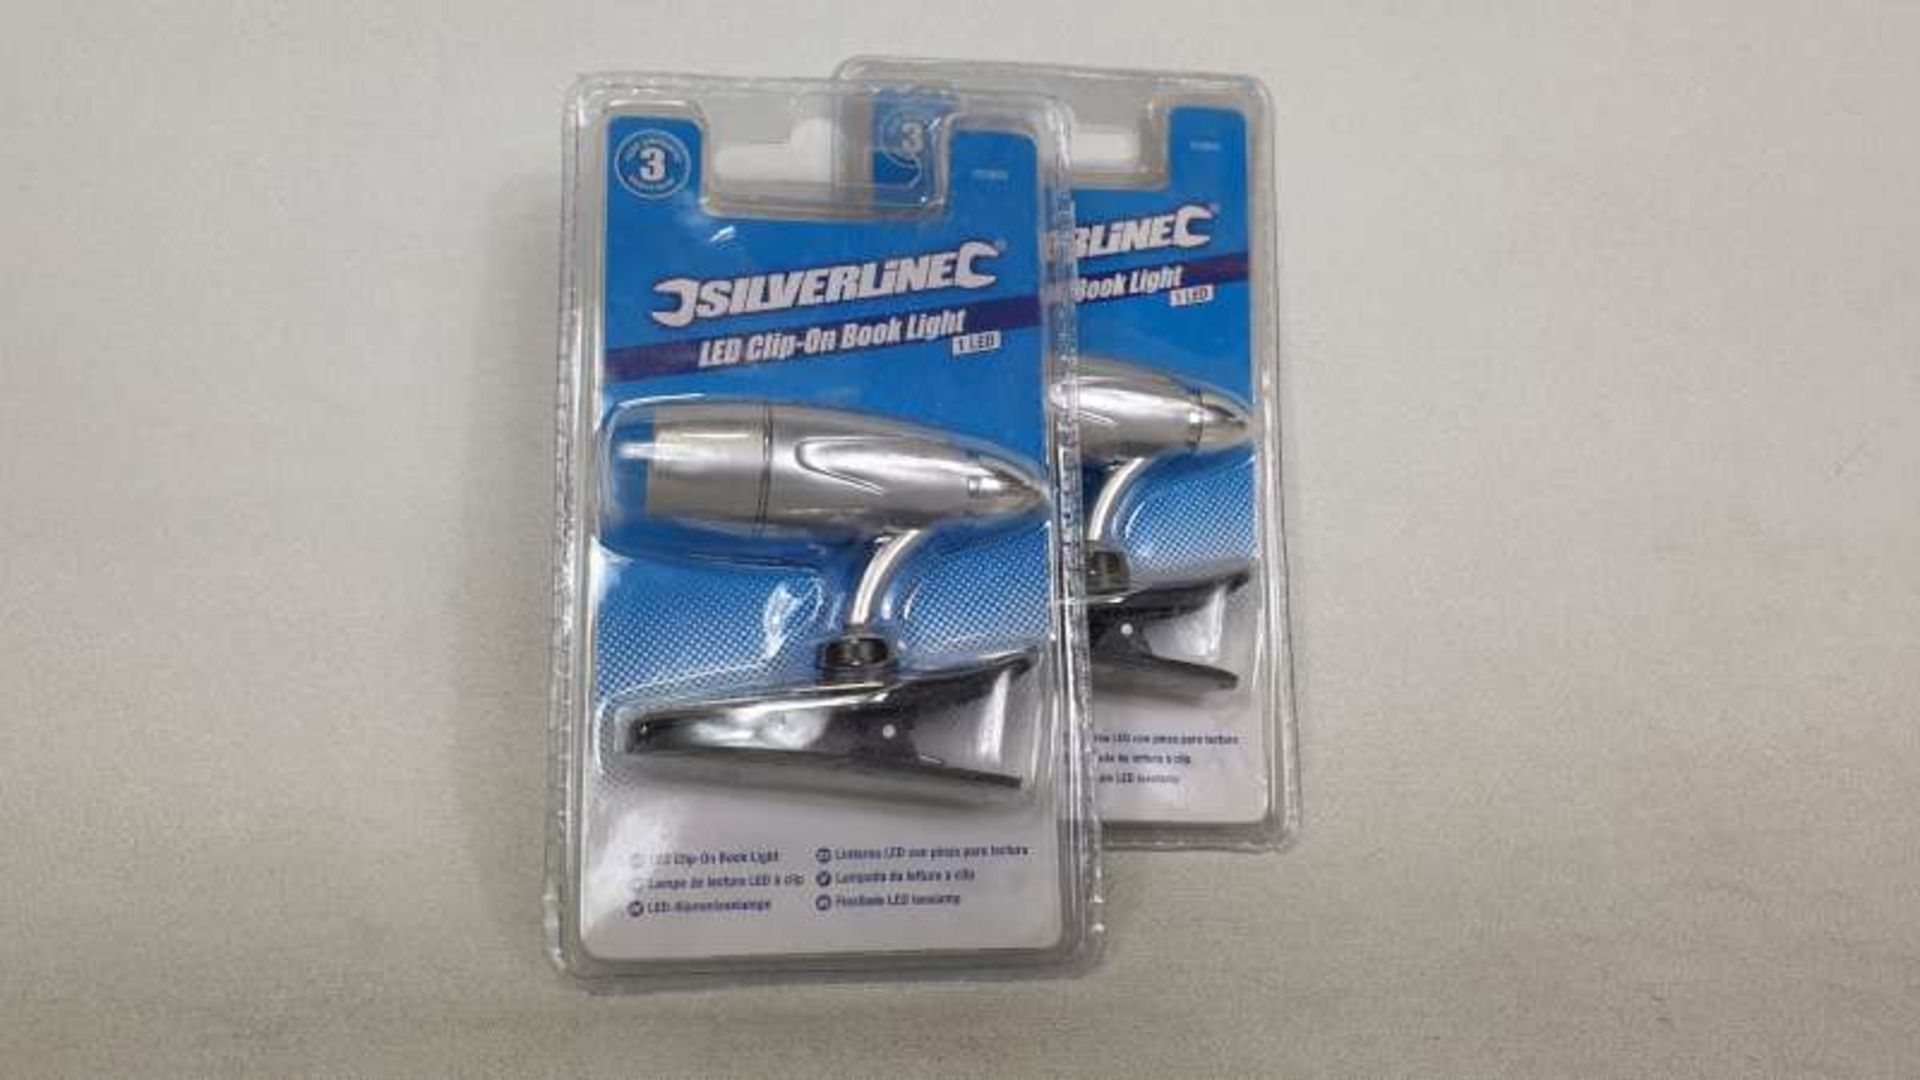 96 X BRAND NEW SILVERLINE LED CLIP ON BOOK LIGHT IN 1 BOX